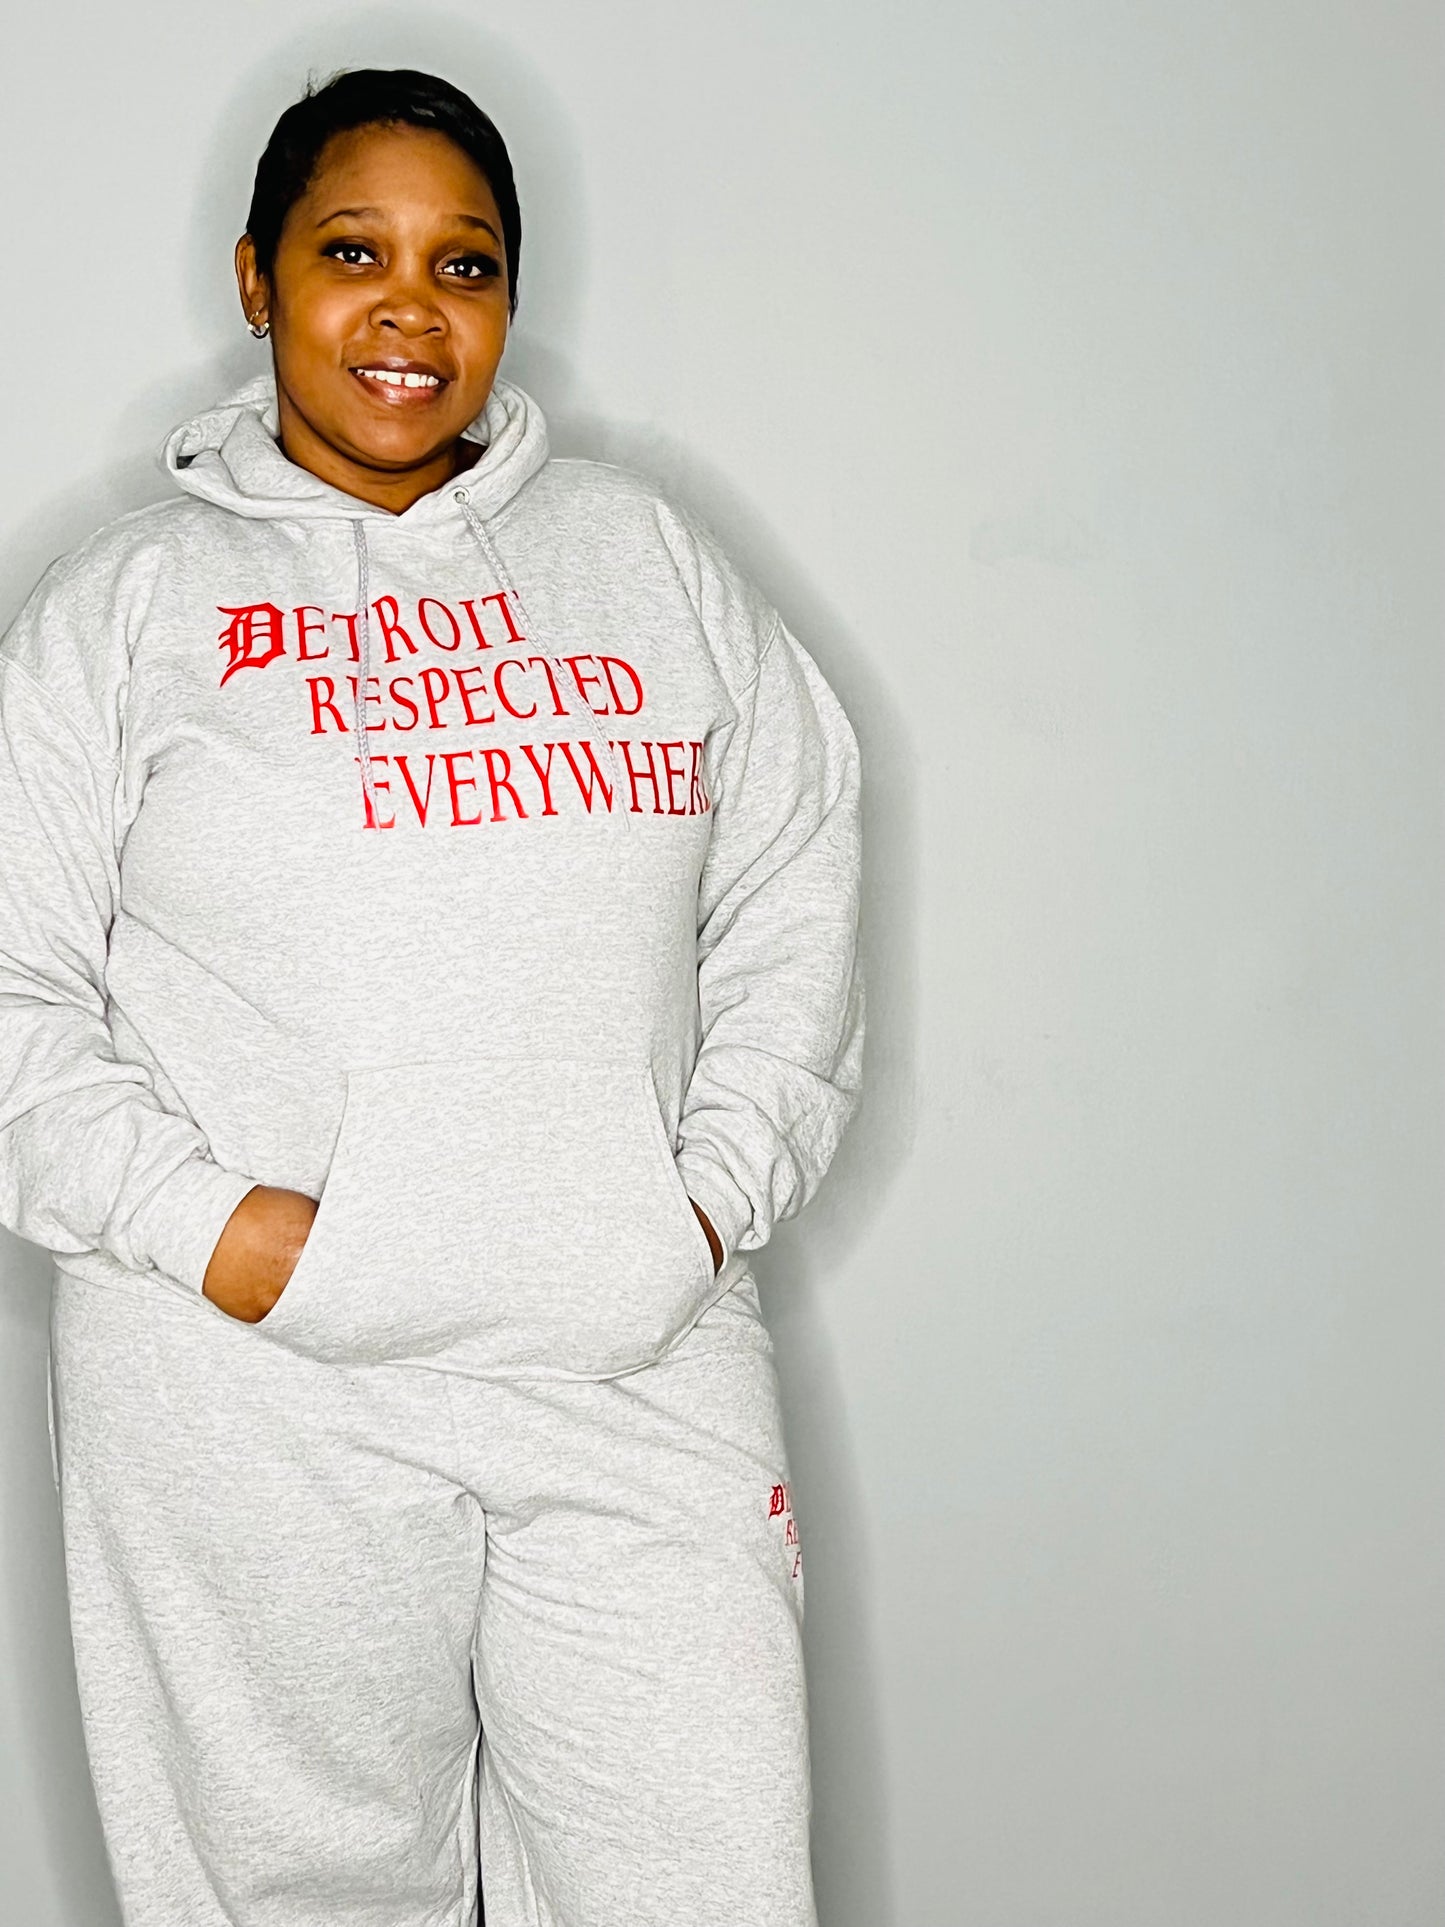 Gray Staggered Jogging Suit w/ red letters